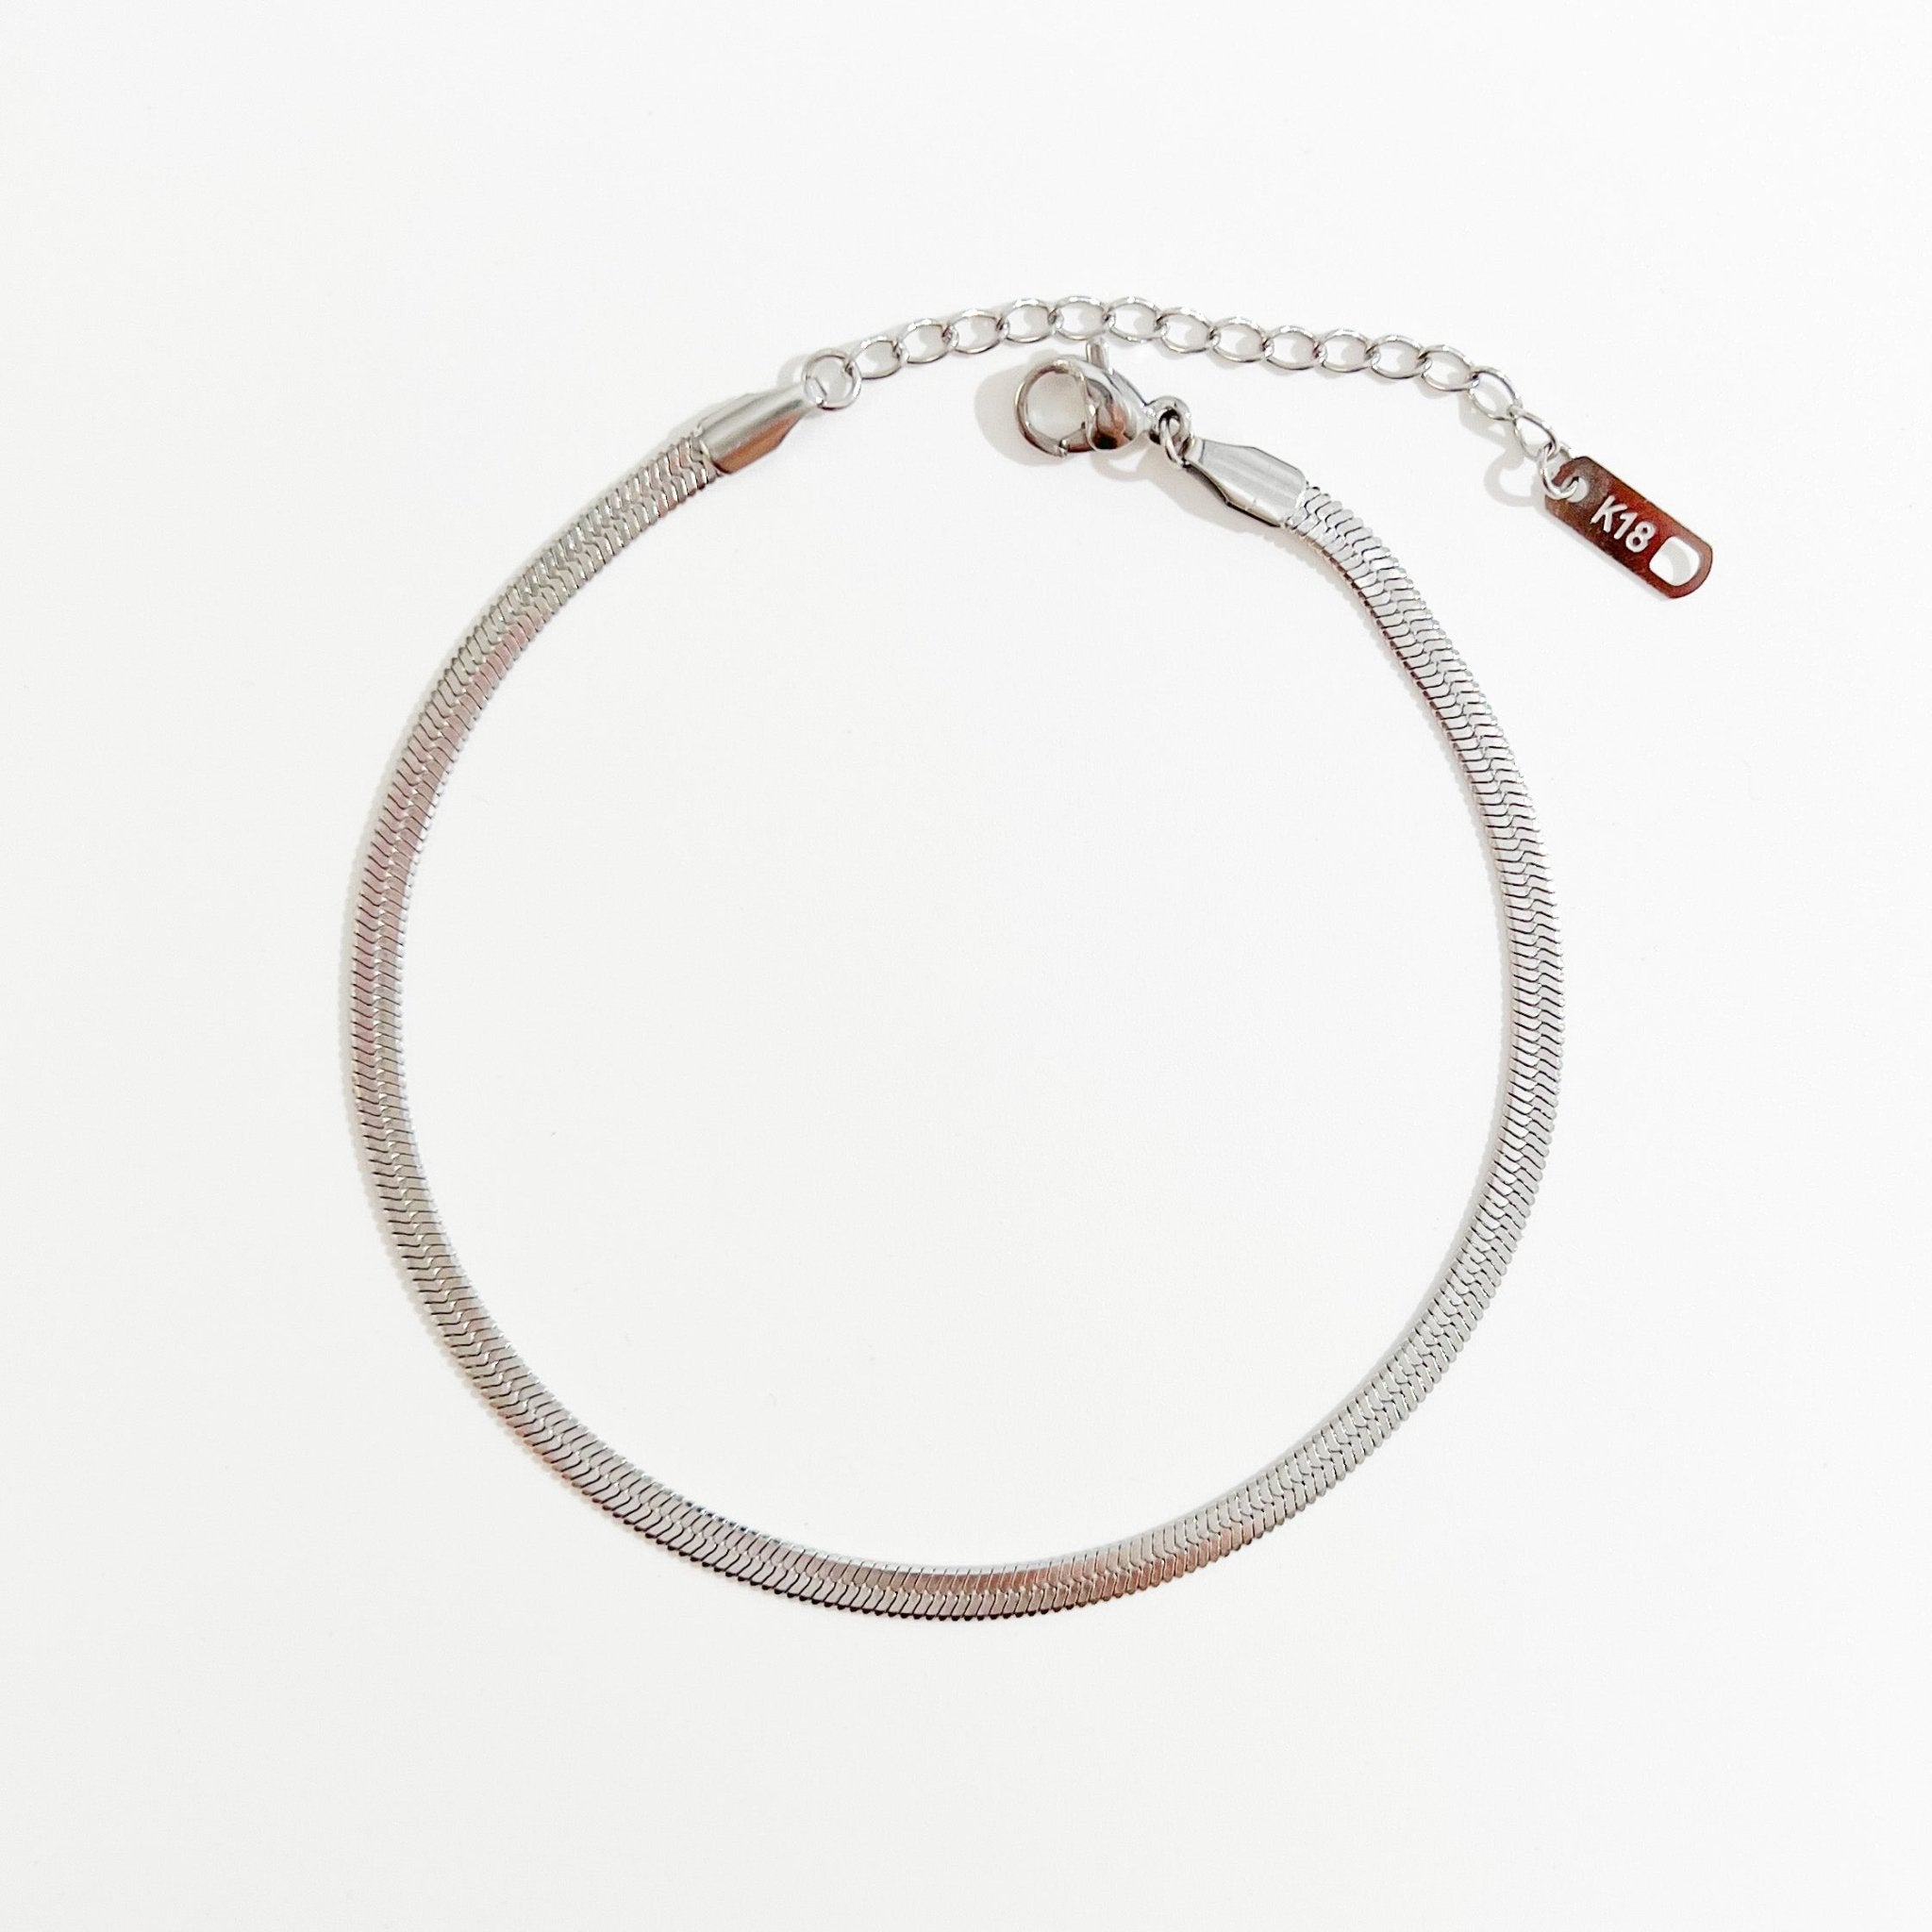 Herringbone Silver Anklet - Flaire & Co.